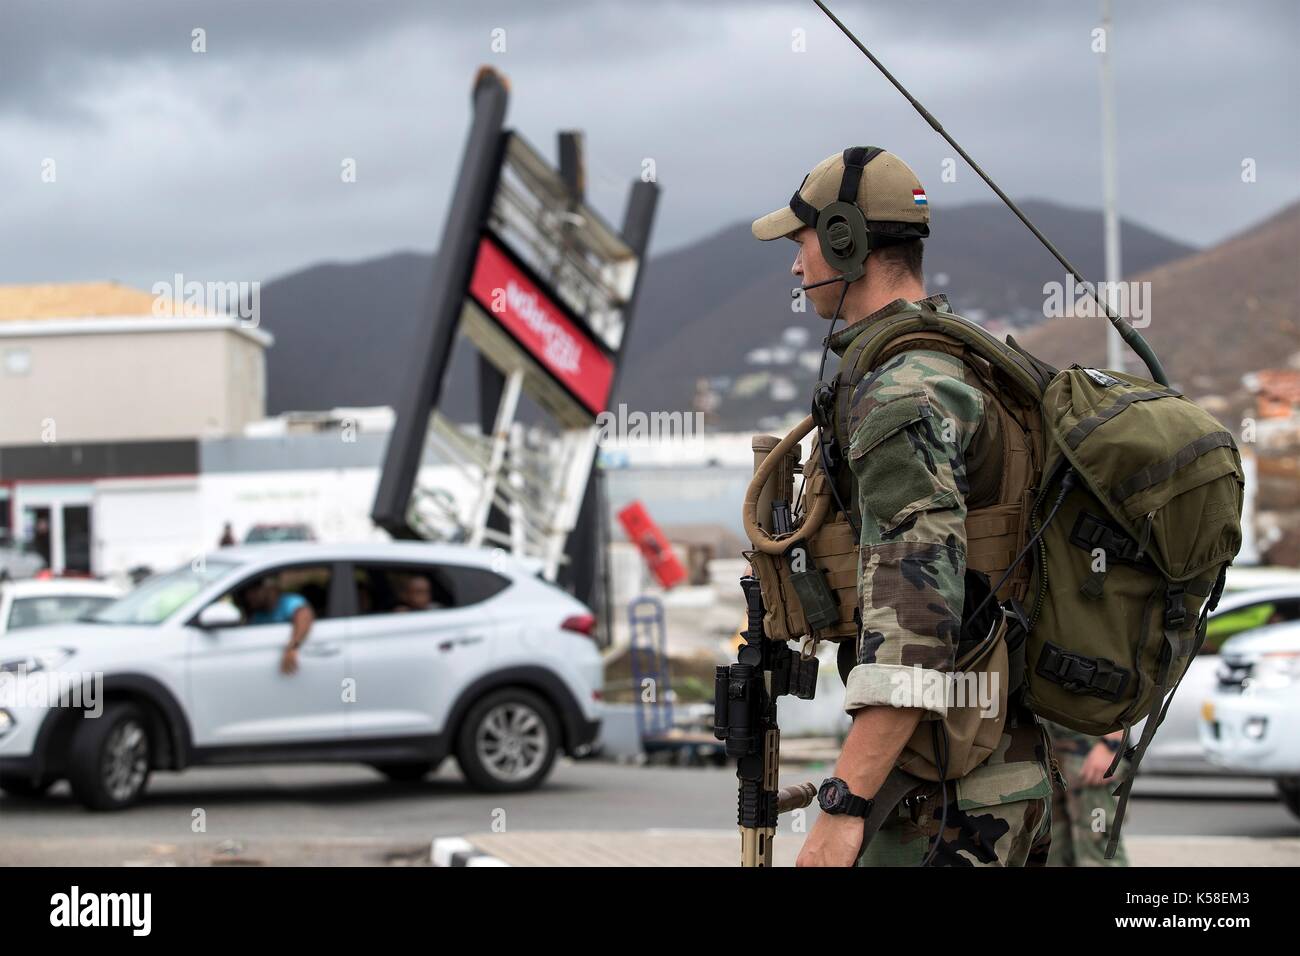 Dutch Marines stand guard to prevent looting and assist residents in the aftermath of Hurricane Irma that devastated much of the island September 7, 2017 in Philipsburg, St. Maarten. Stock Photo